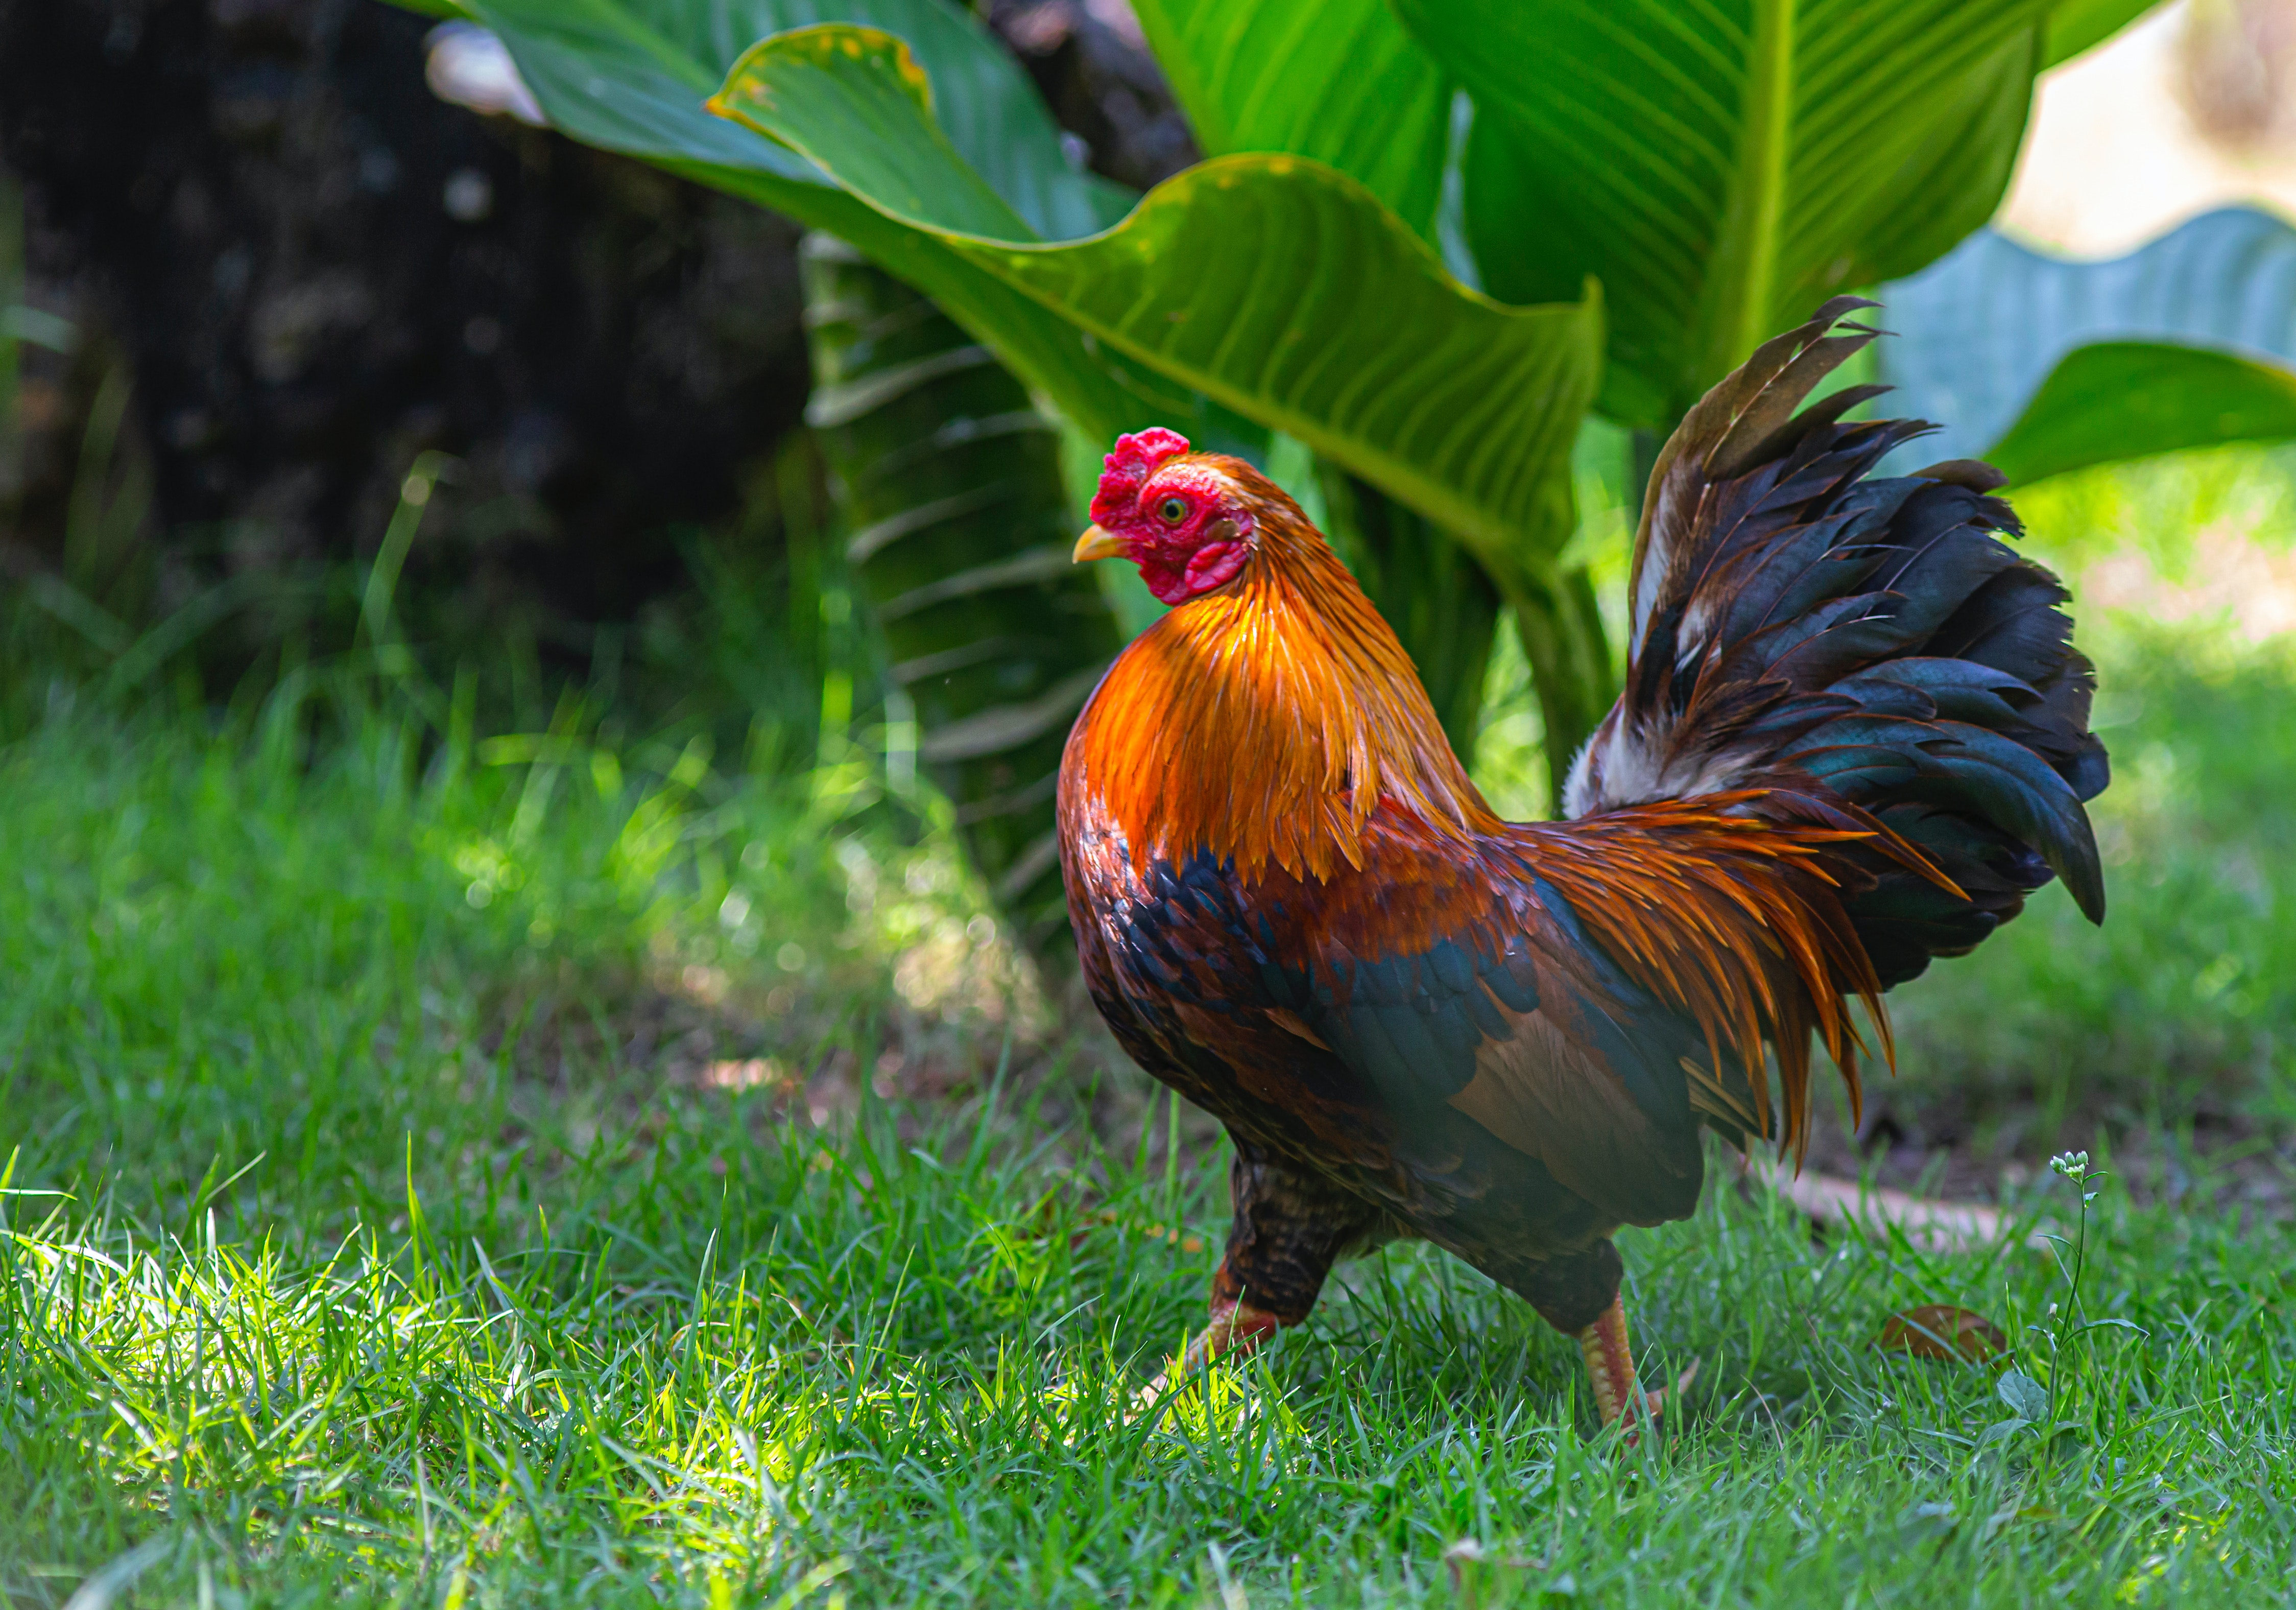 What is Penetration Testing and why is it like catching chickens?